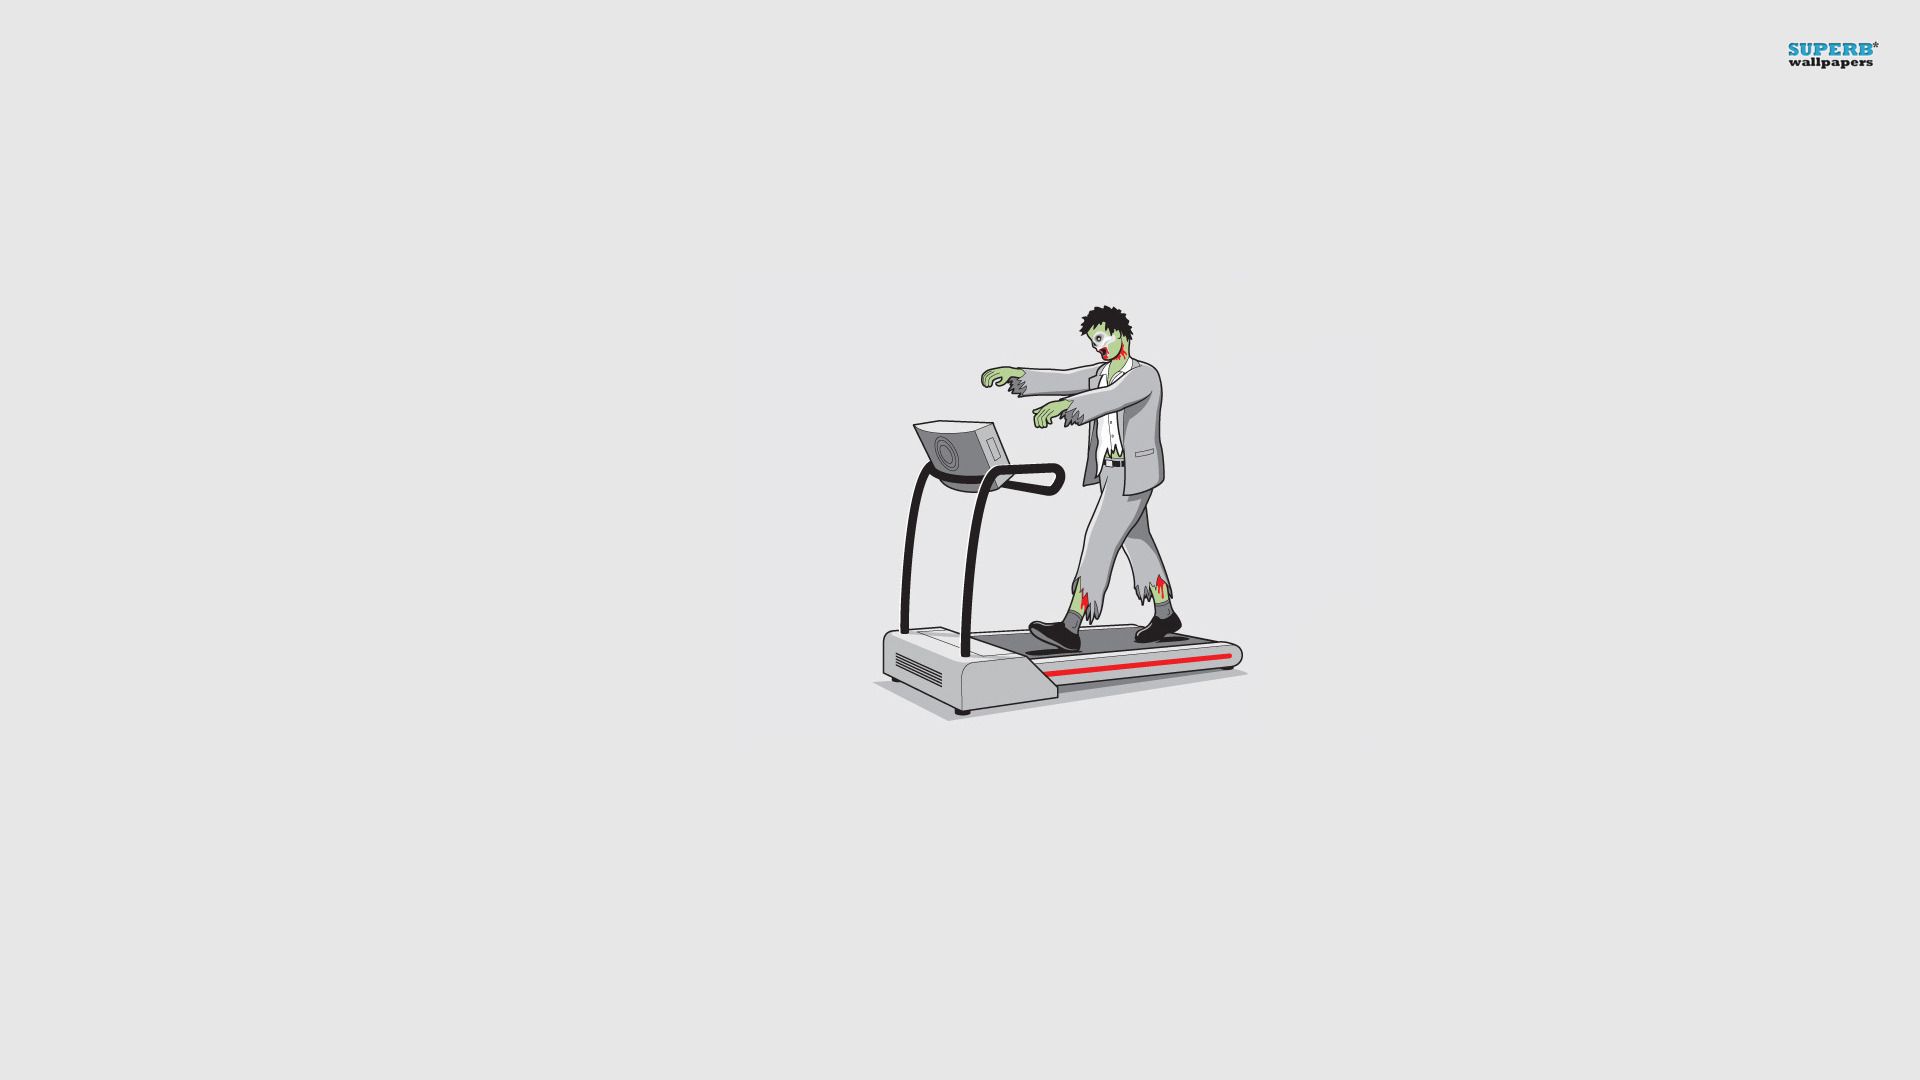 Zombie on a treadmill wallpaper - Funny wallpapers